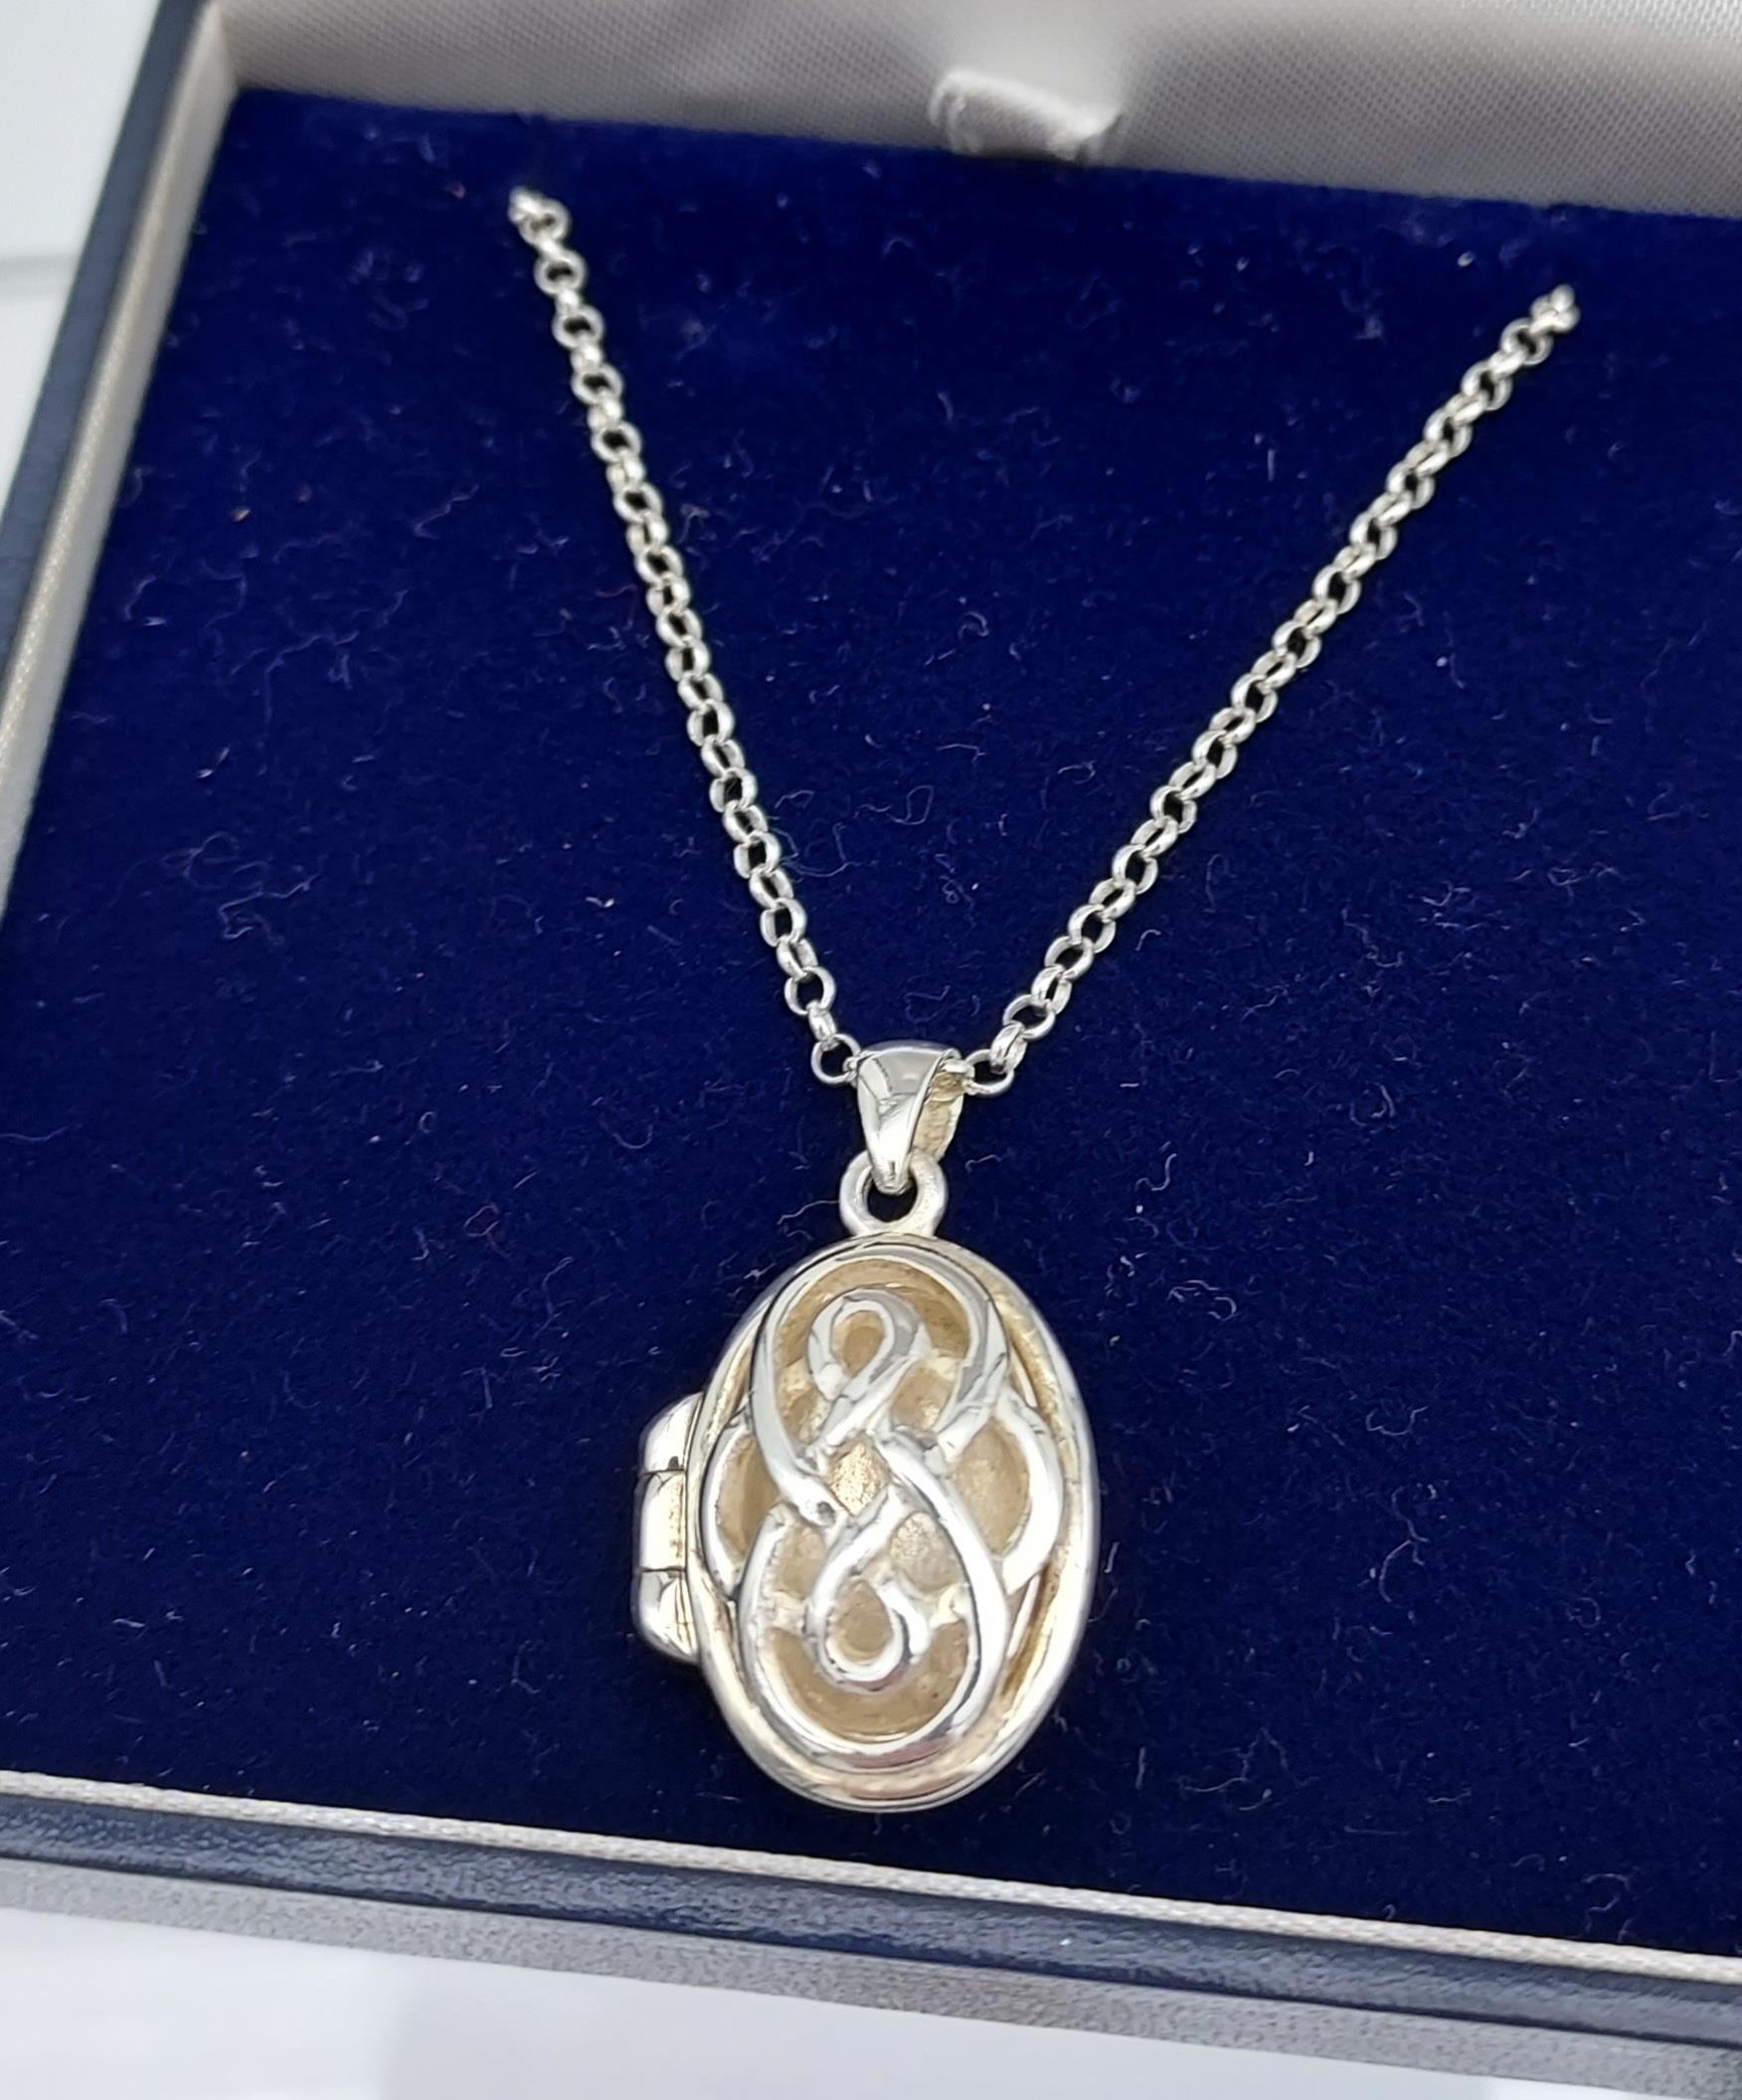 Silver Celtic design locket, silver chain & pendant, silver clam shell with pearl pendant, agate and - Image 3 of 5